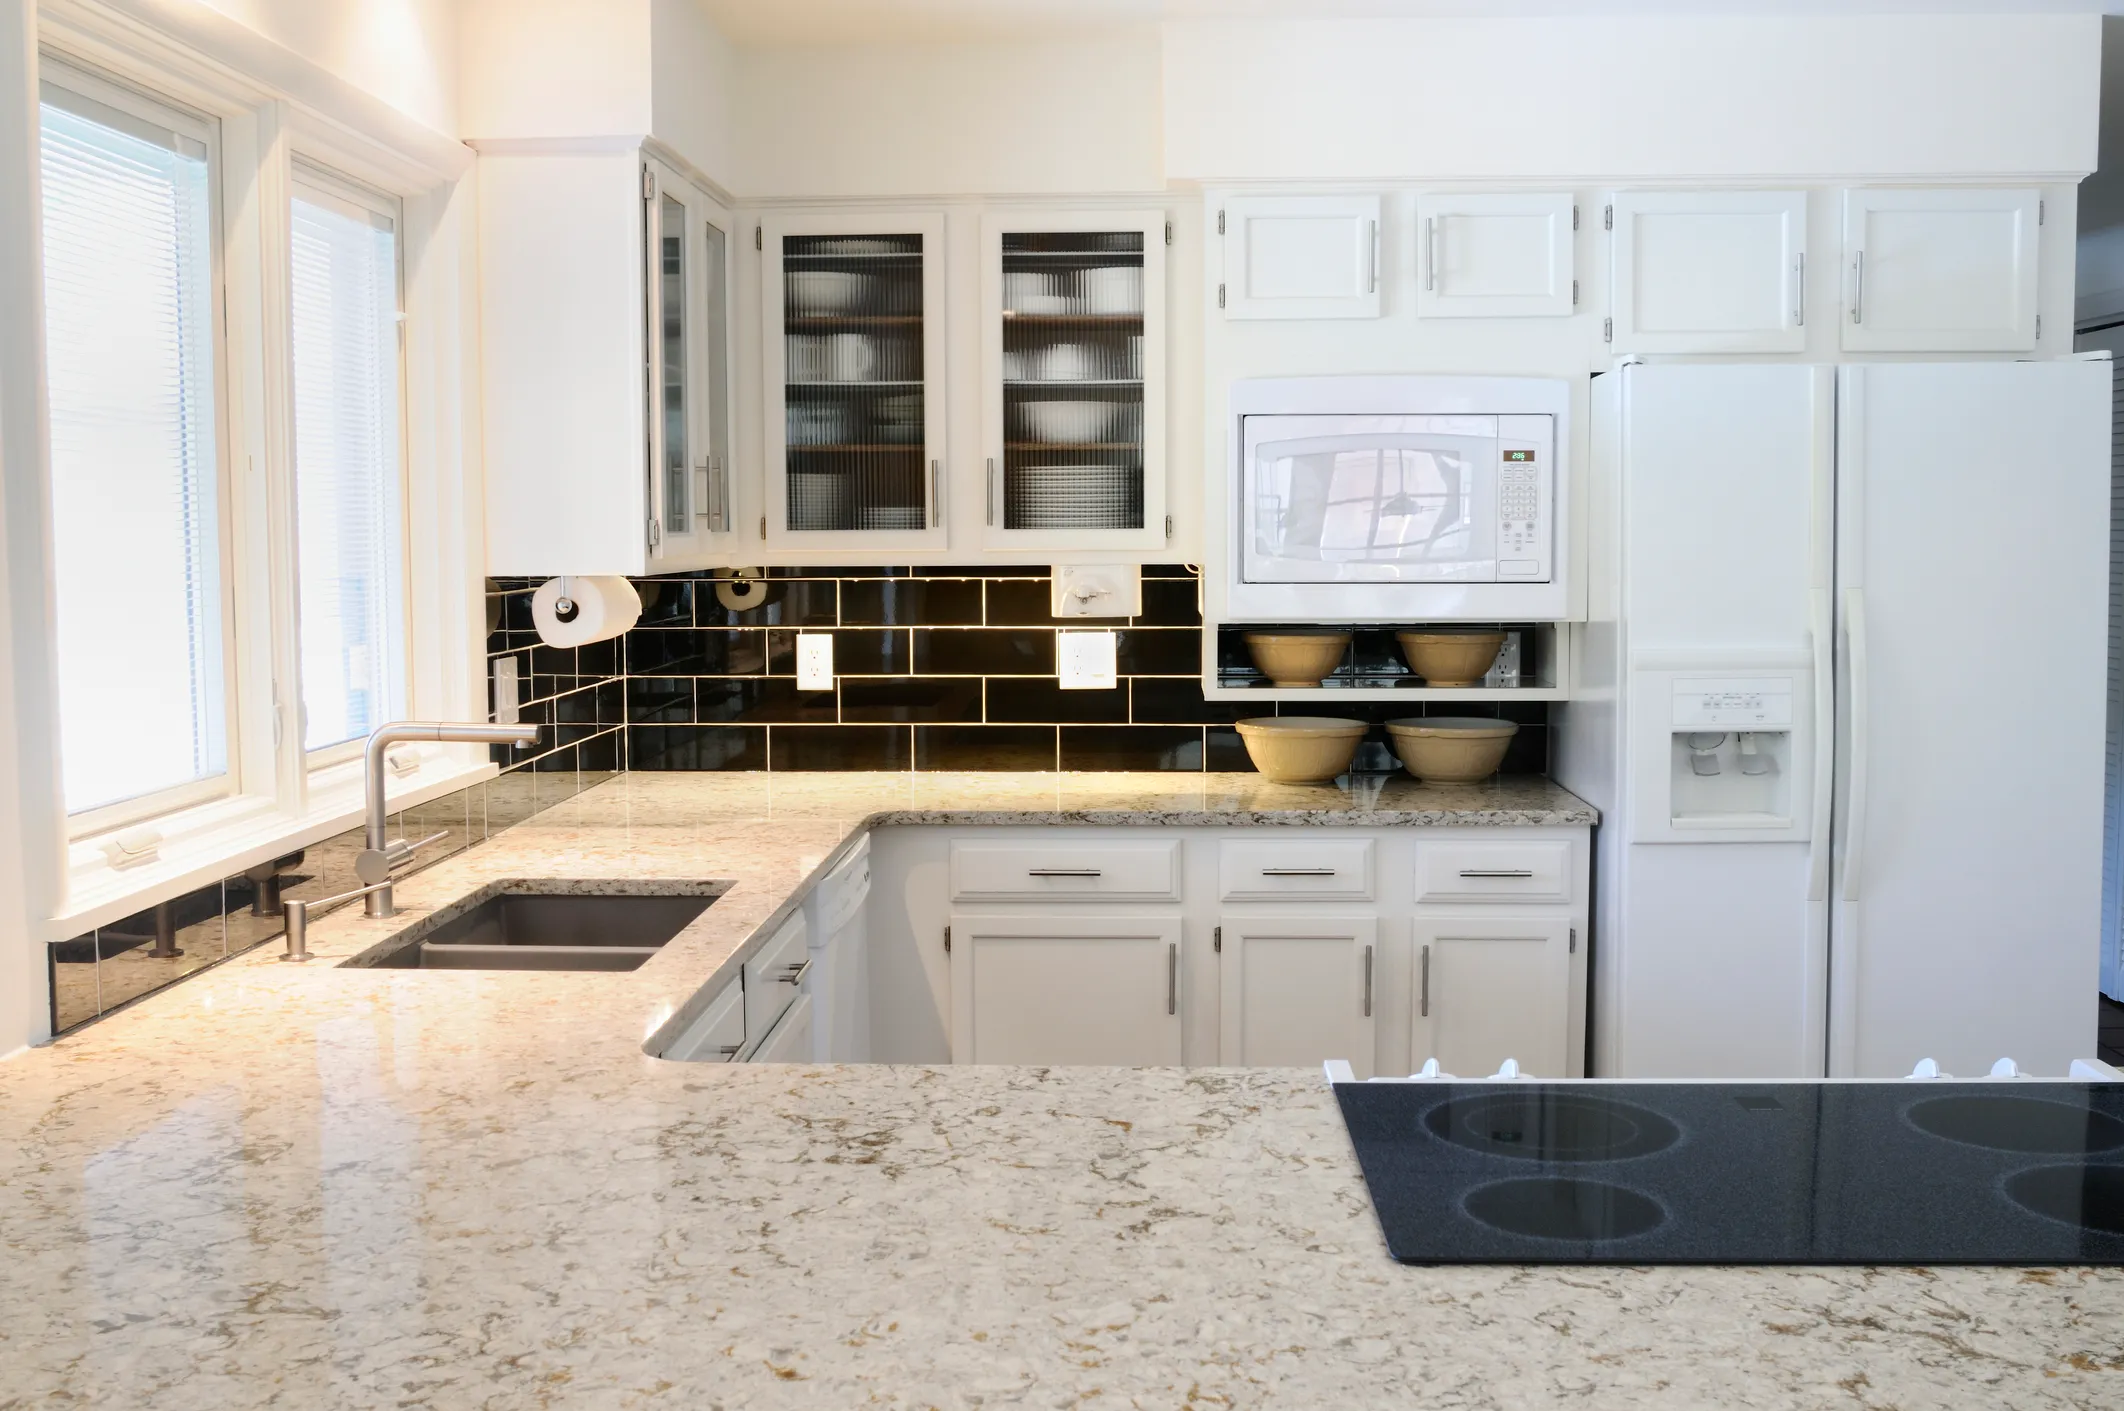  How to Keep Your Quartz Kitchen Countertop Disinfected?